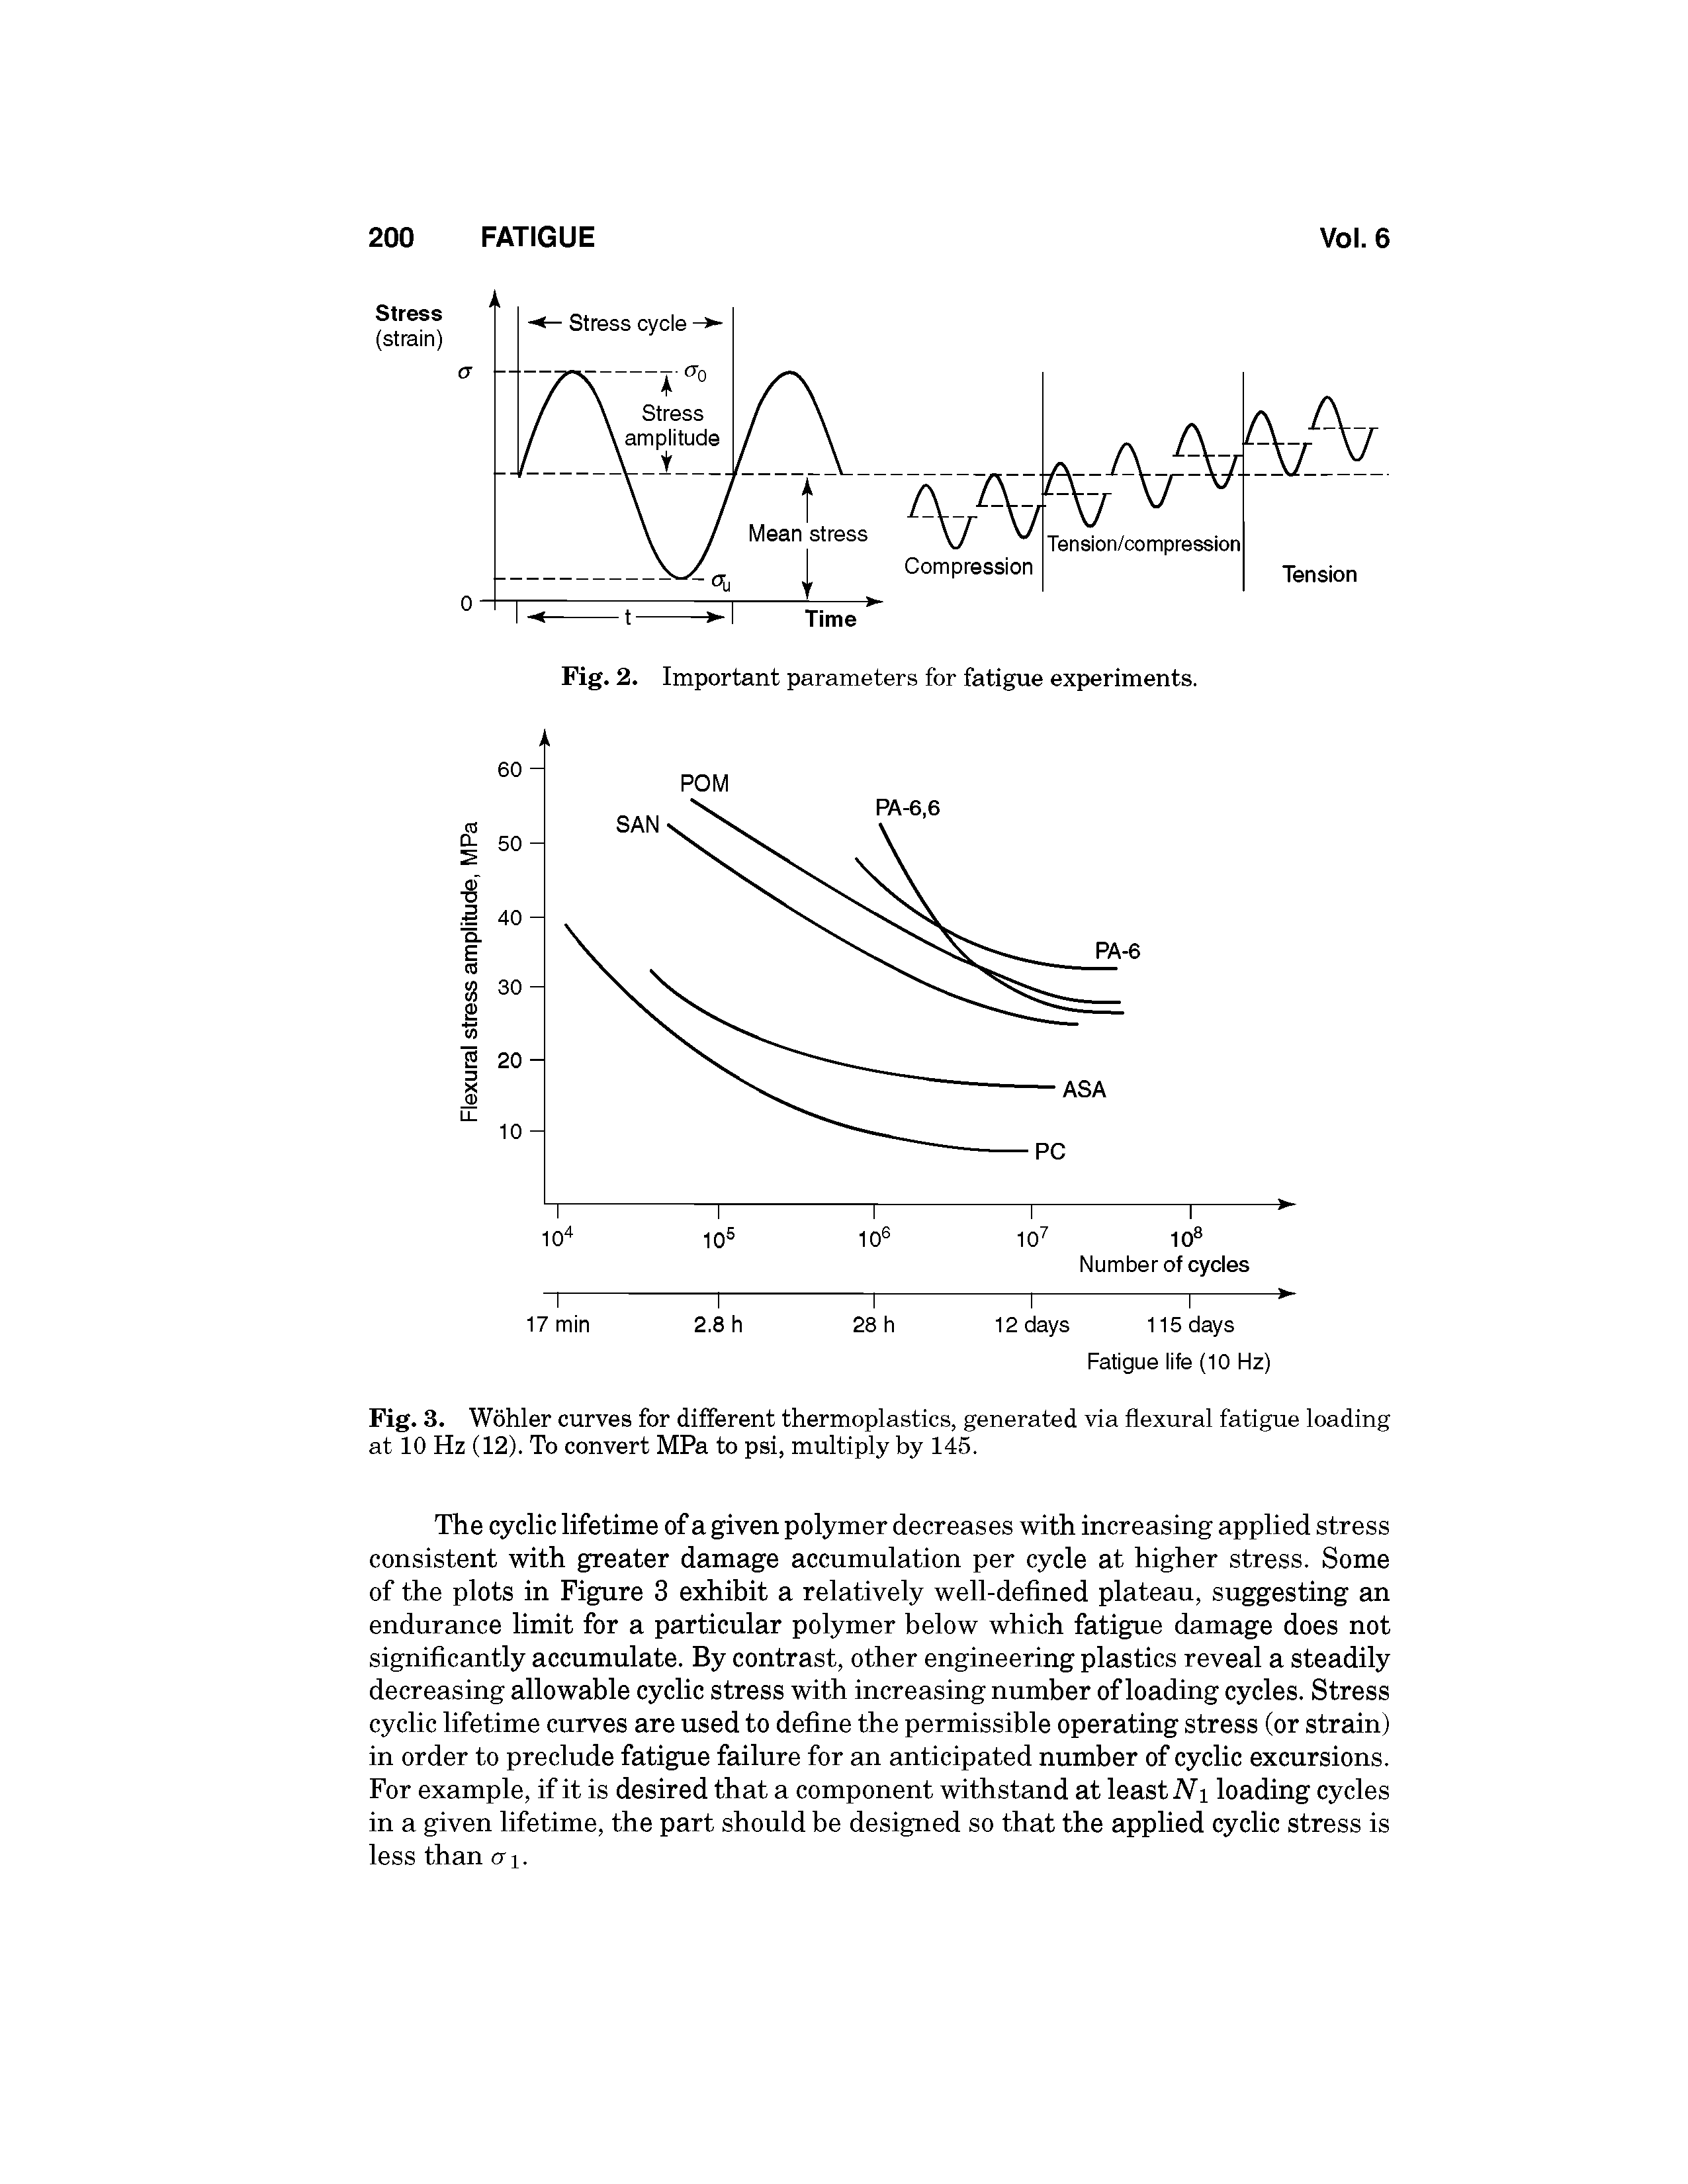 Fig. 3. Wohler curves for different thermoplastics, generated via flexural fatigue loading at 10 Hz (12). To convert MPa to psi, multiply by 145.